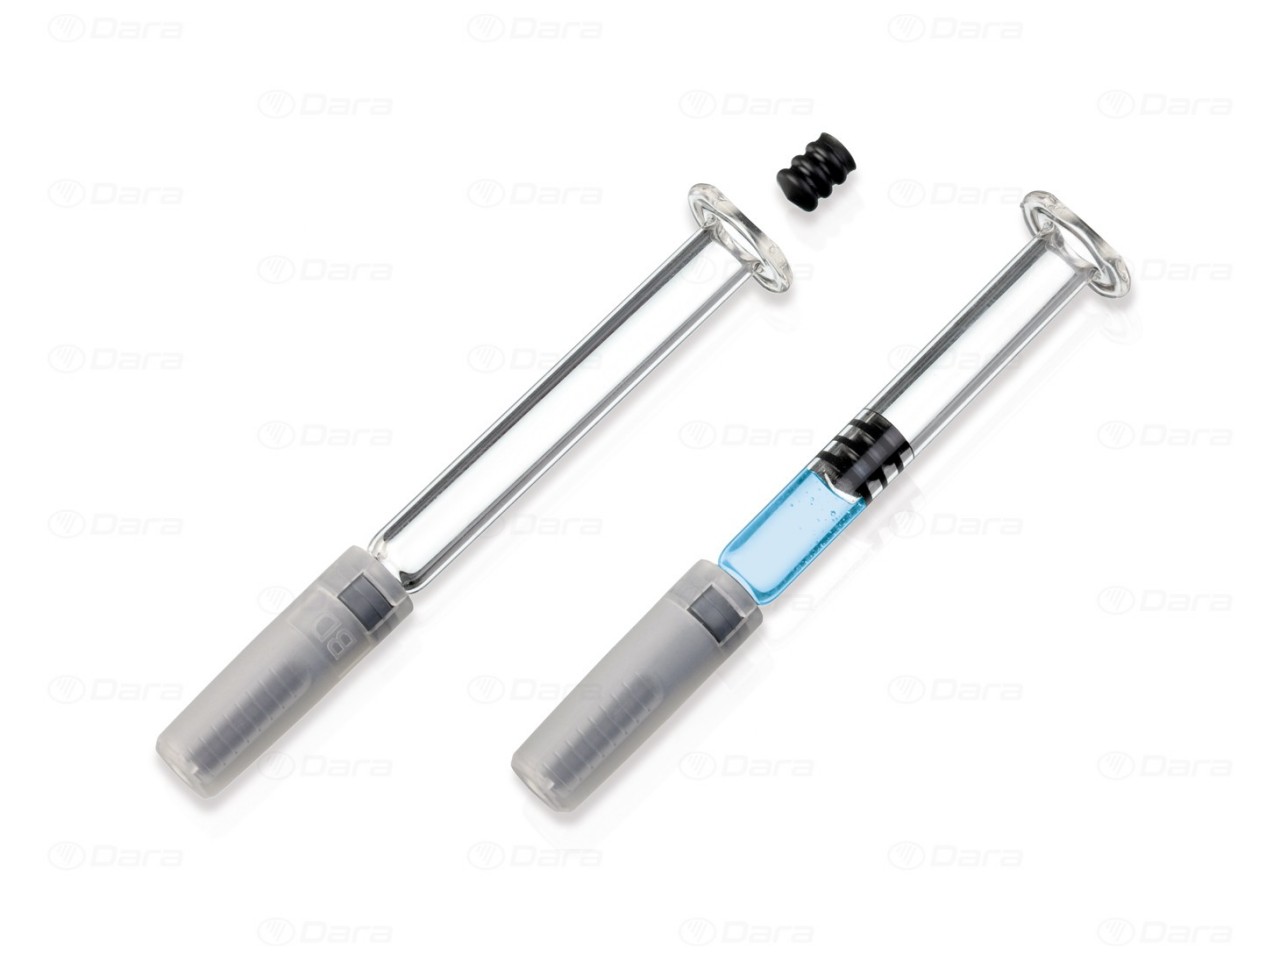 Tabletop machines for closing syringes